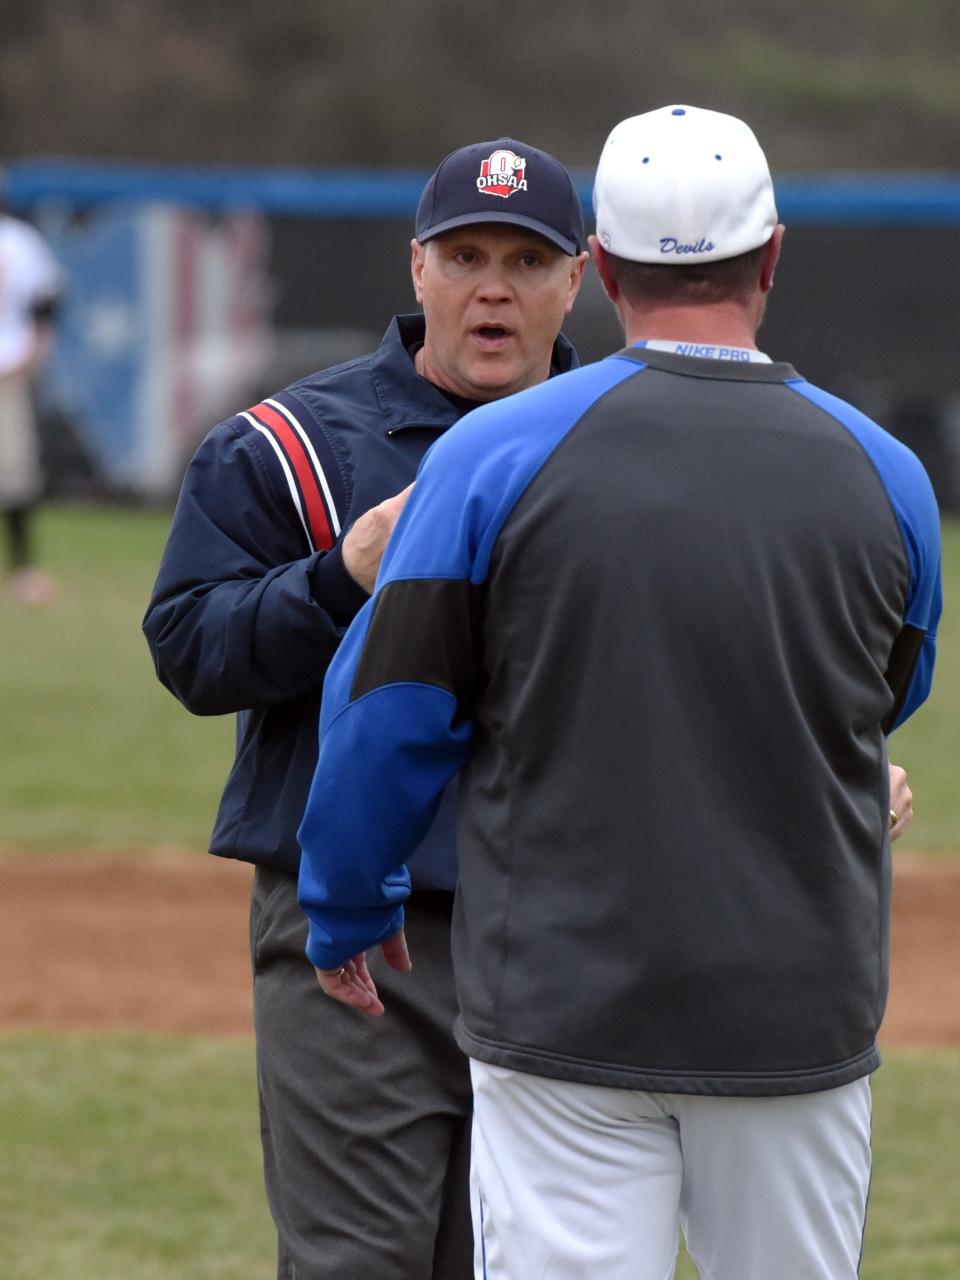 Field umpire Scott Welker and Zanesville coach David Balo argue during a game against River View in 2019. Welker, who has officiated baseball, basketball and football in a 33-year career, was inducted into the Ohio High School Athletic Association Hall of Fame last weekend in Columbus.